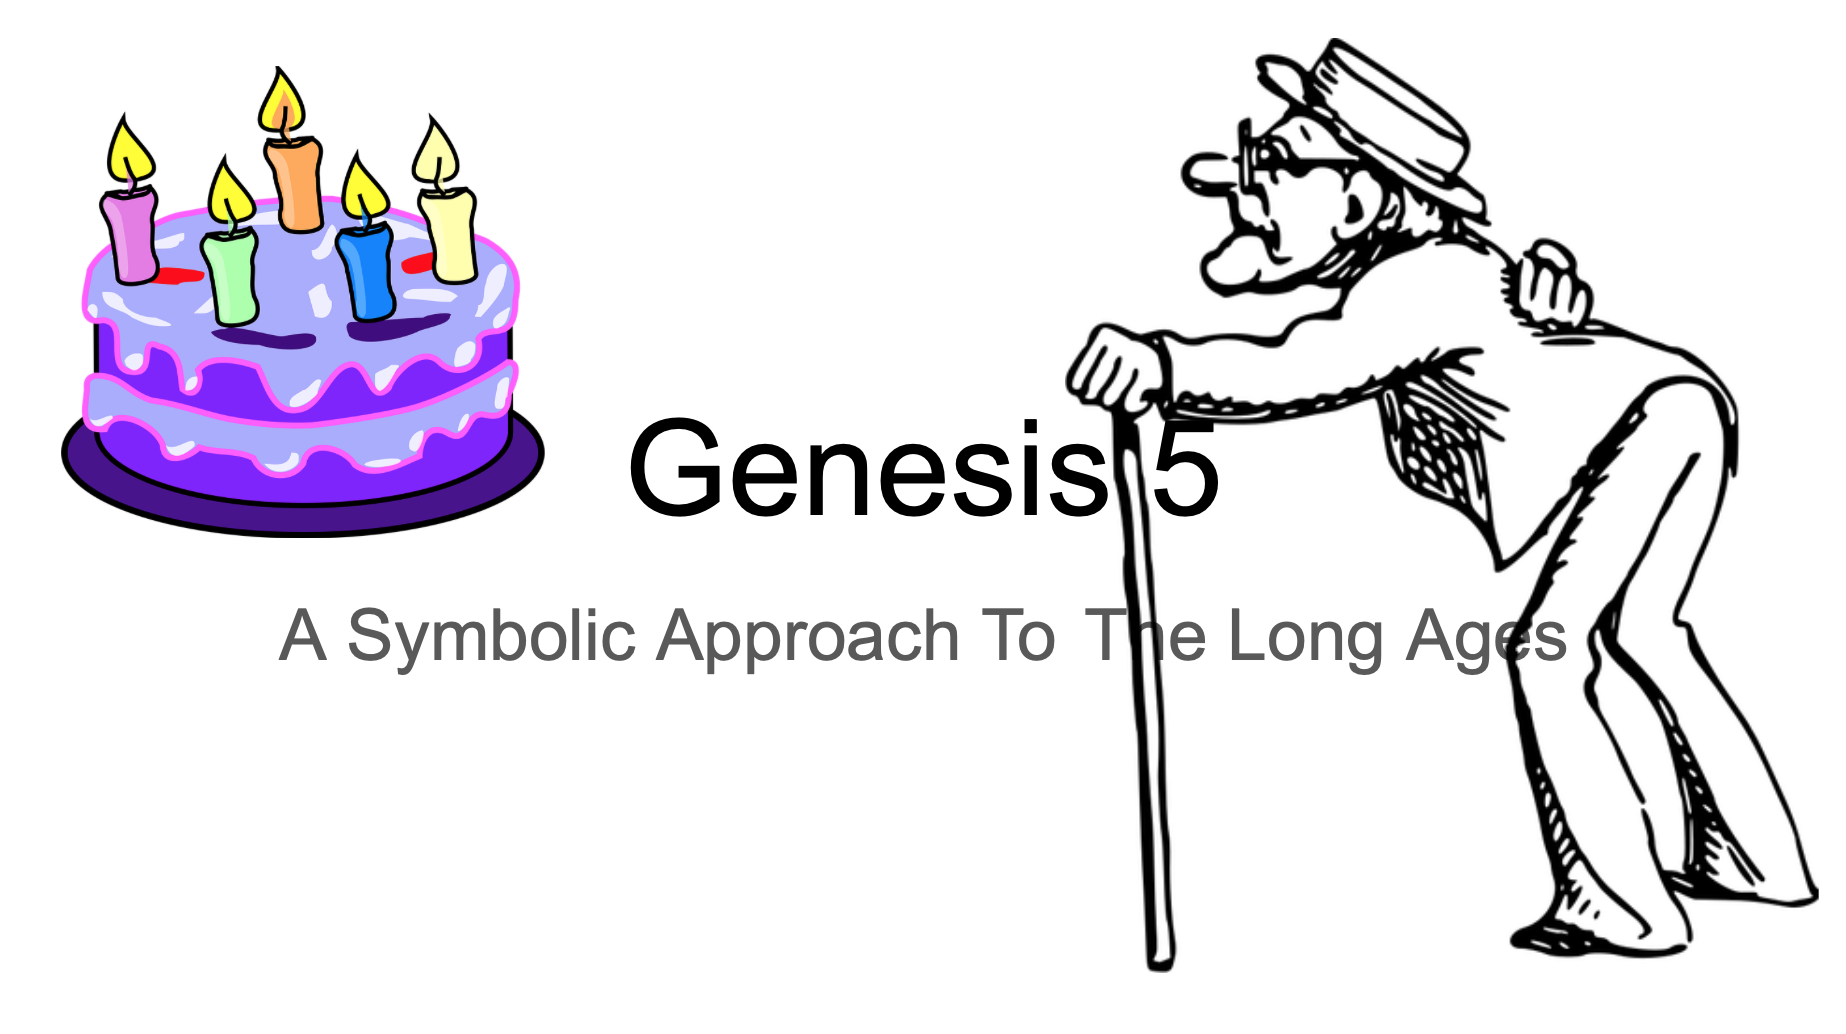 Genesis 5: A Symbolic Approach To The Long Ages